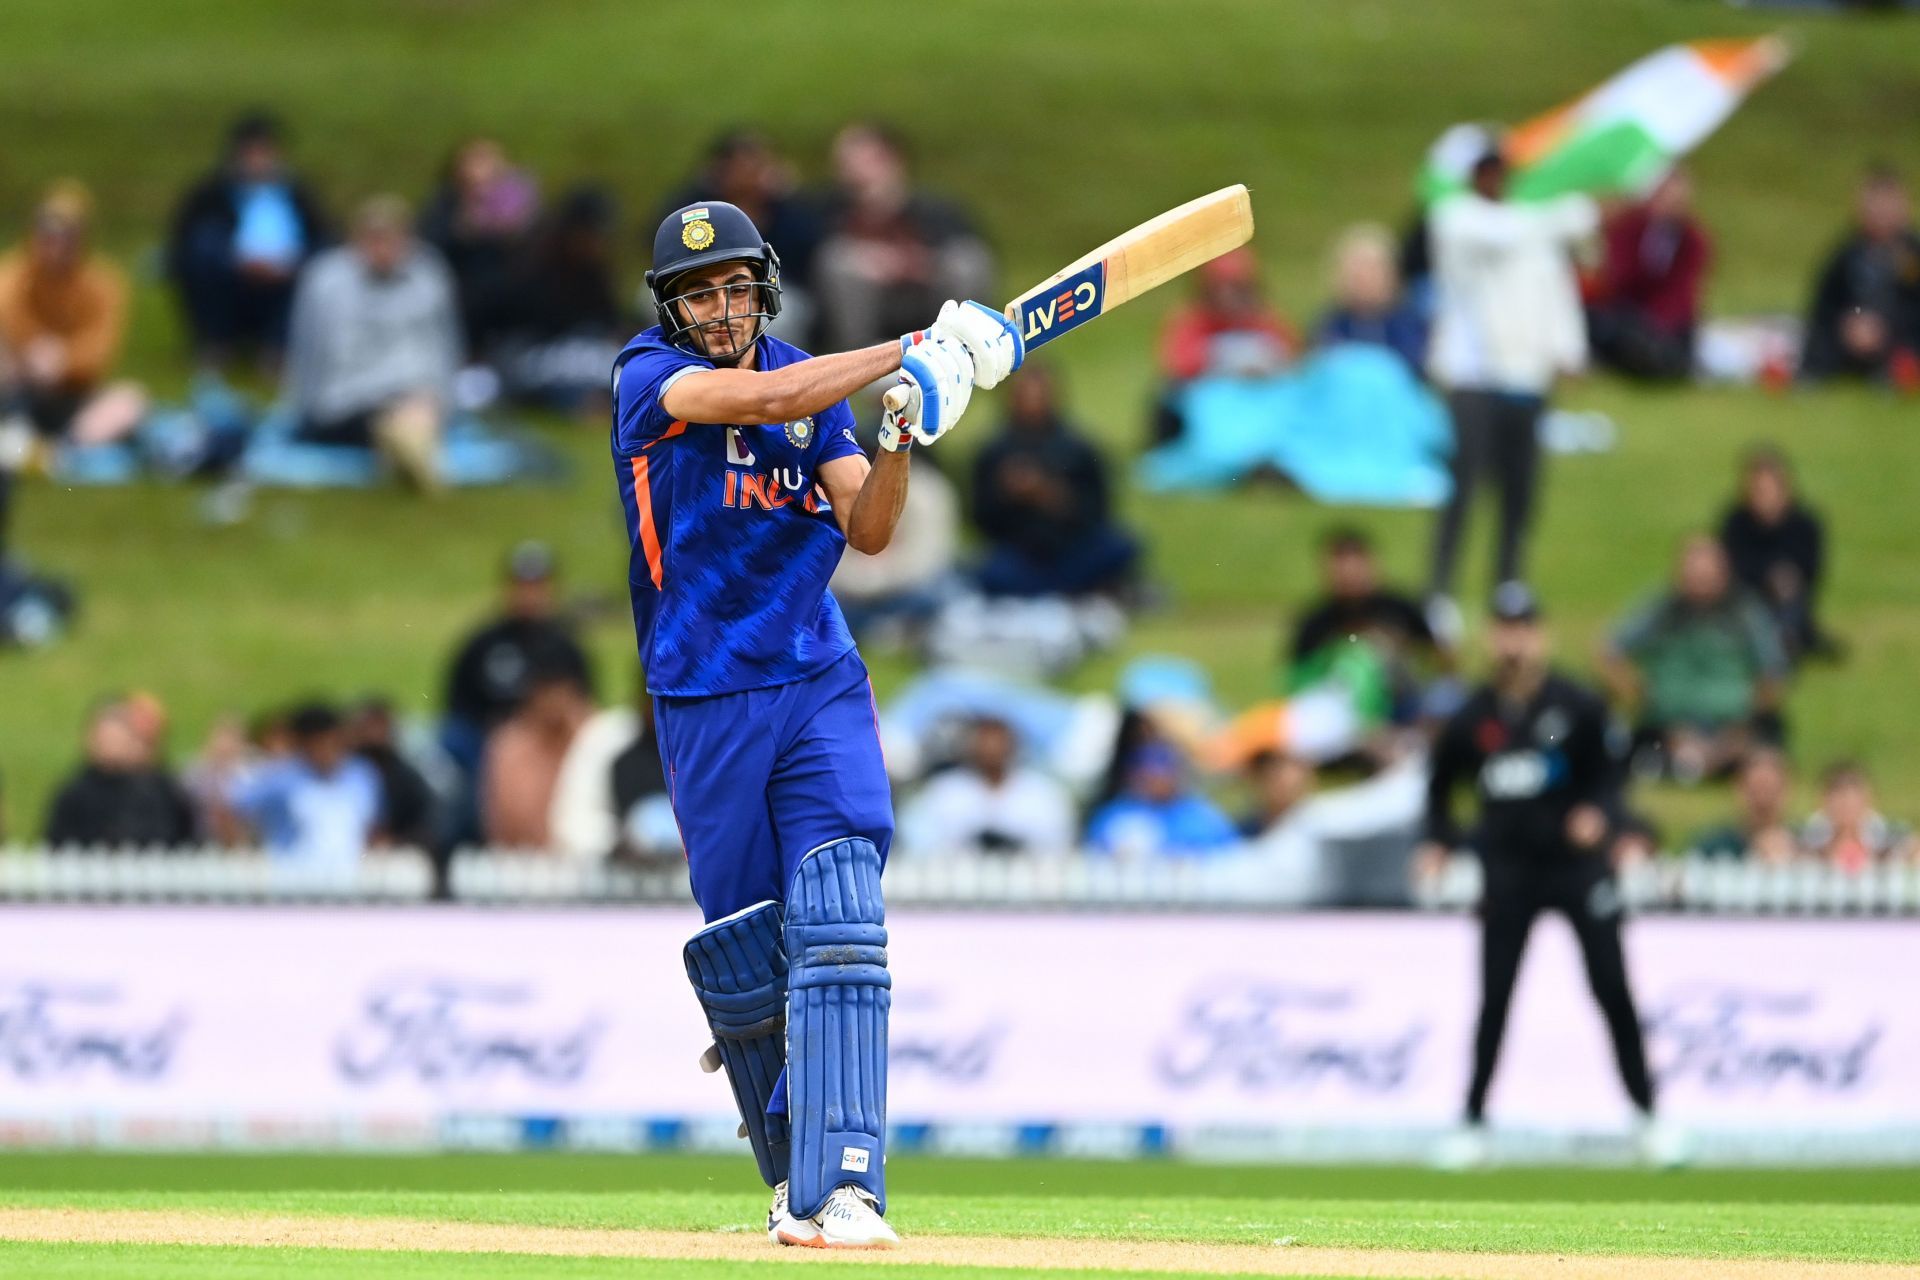 Shubman Gill has been prolific at the top of the order in ODI cricket.